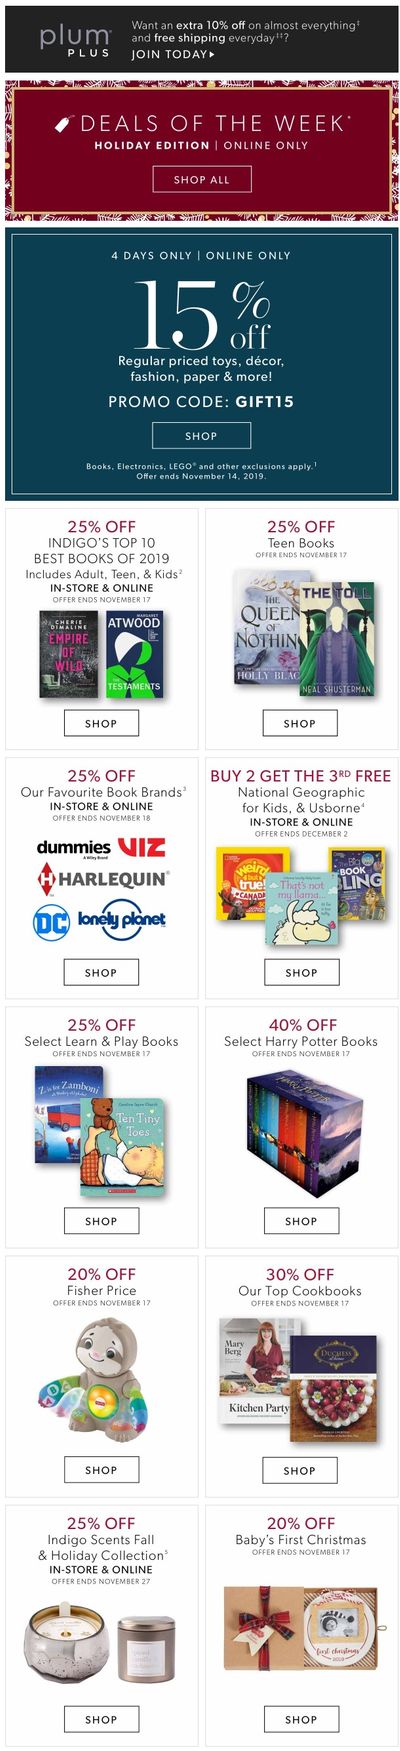 Chapters Indigo Online Deals of the Week November 11 to 17